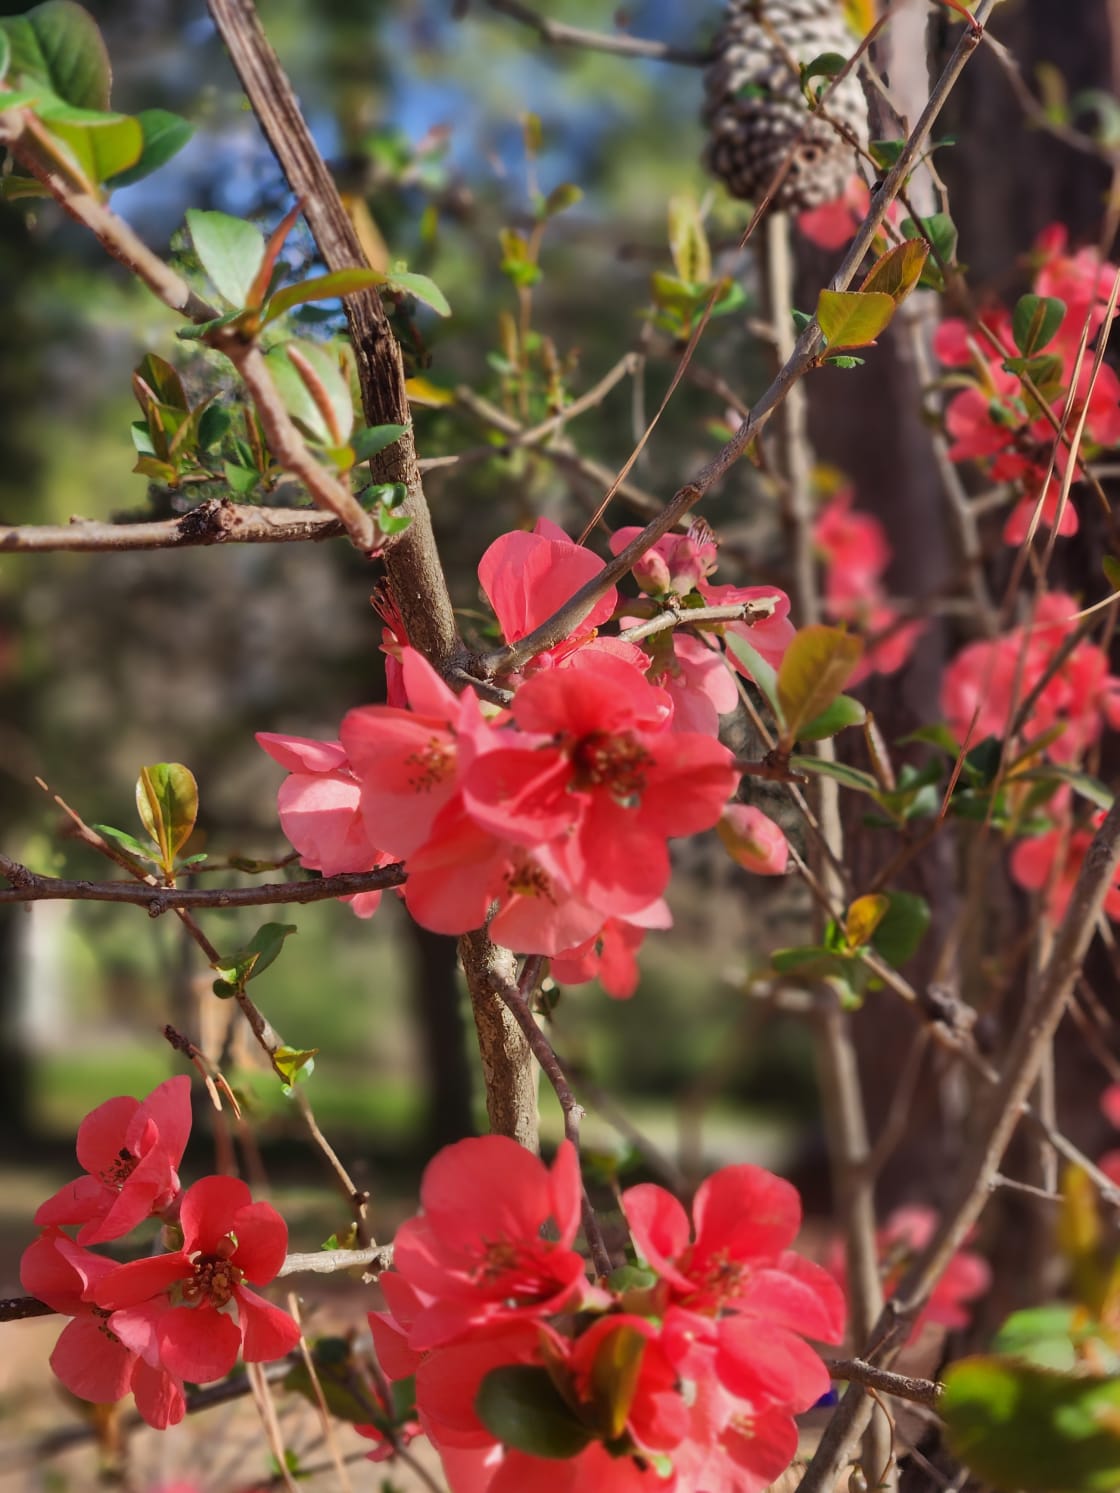 quince - not native but certainly beautiful.  a winter flower we enjoy!